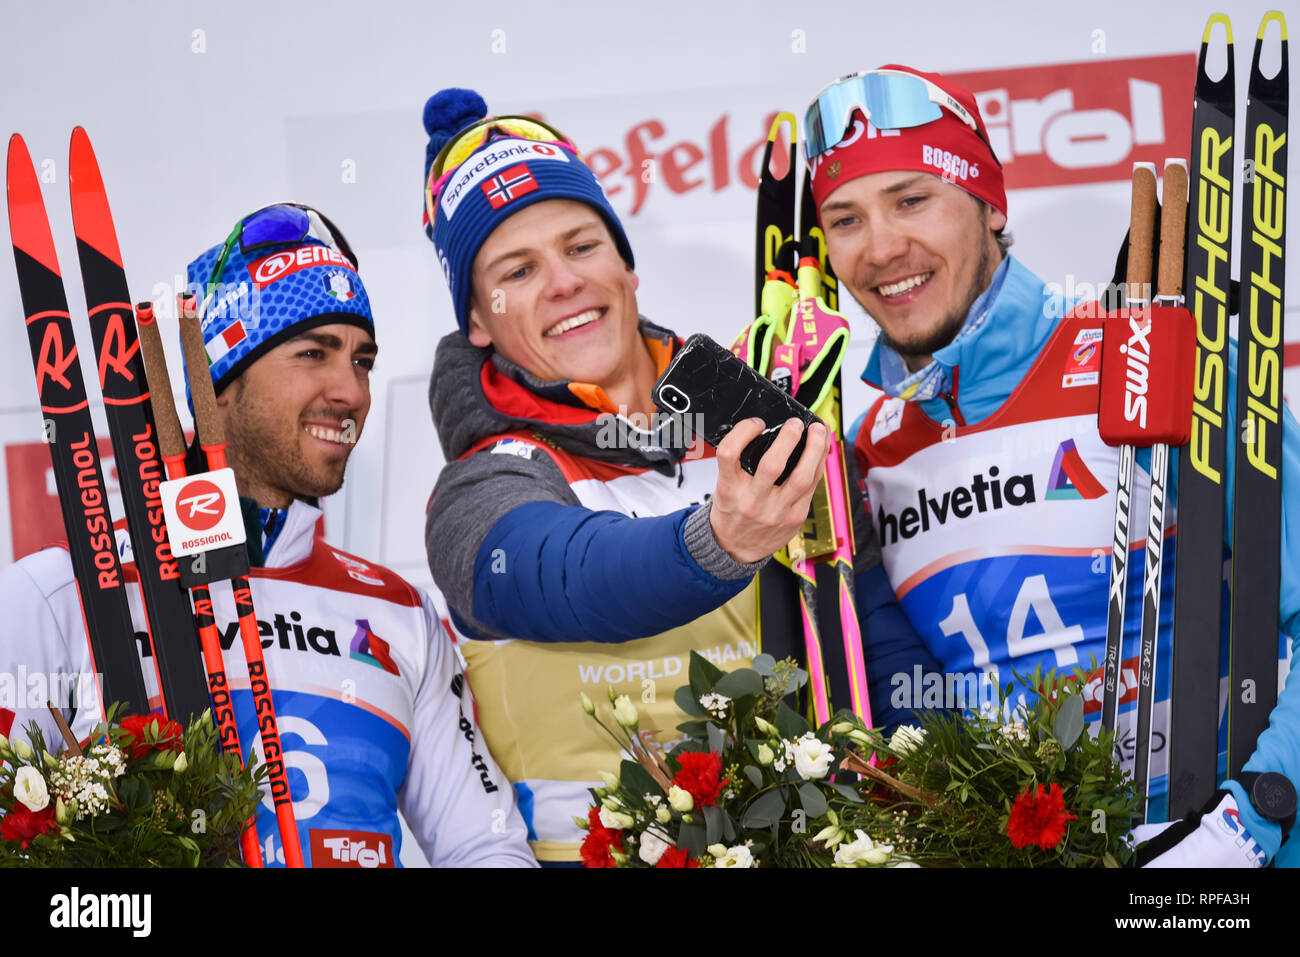 Seefeld, Austria. 21st Feb, 2019. Norway's Johannes Hoesflot Klaebo, center, takes a selfie with fellow racers on the podium, Frederico Pelligrino, Italy, left, and Gleb Retivykh of Russia after the men's 1.6-k freestyle sprint race at the 2019 world nordic ski championships. Klaebo won; Pelligrino was second, Retivykh third. Credit: John Lazenby/Alamy Live News Stock Photo